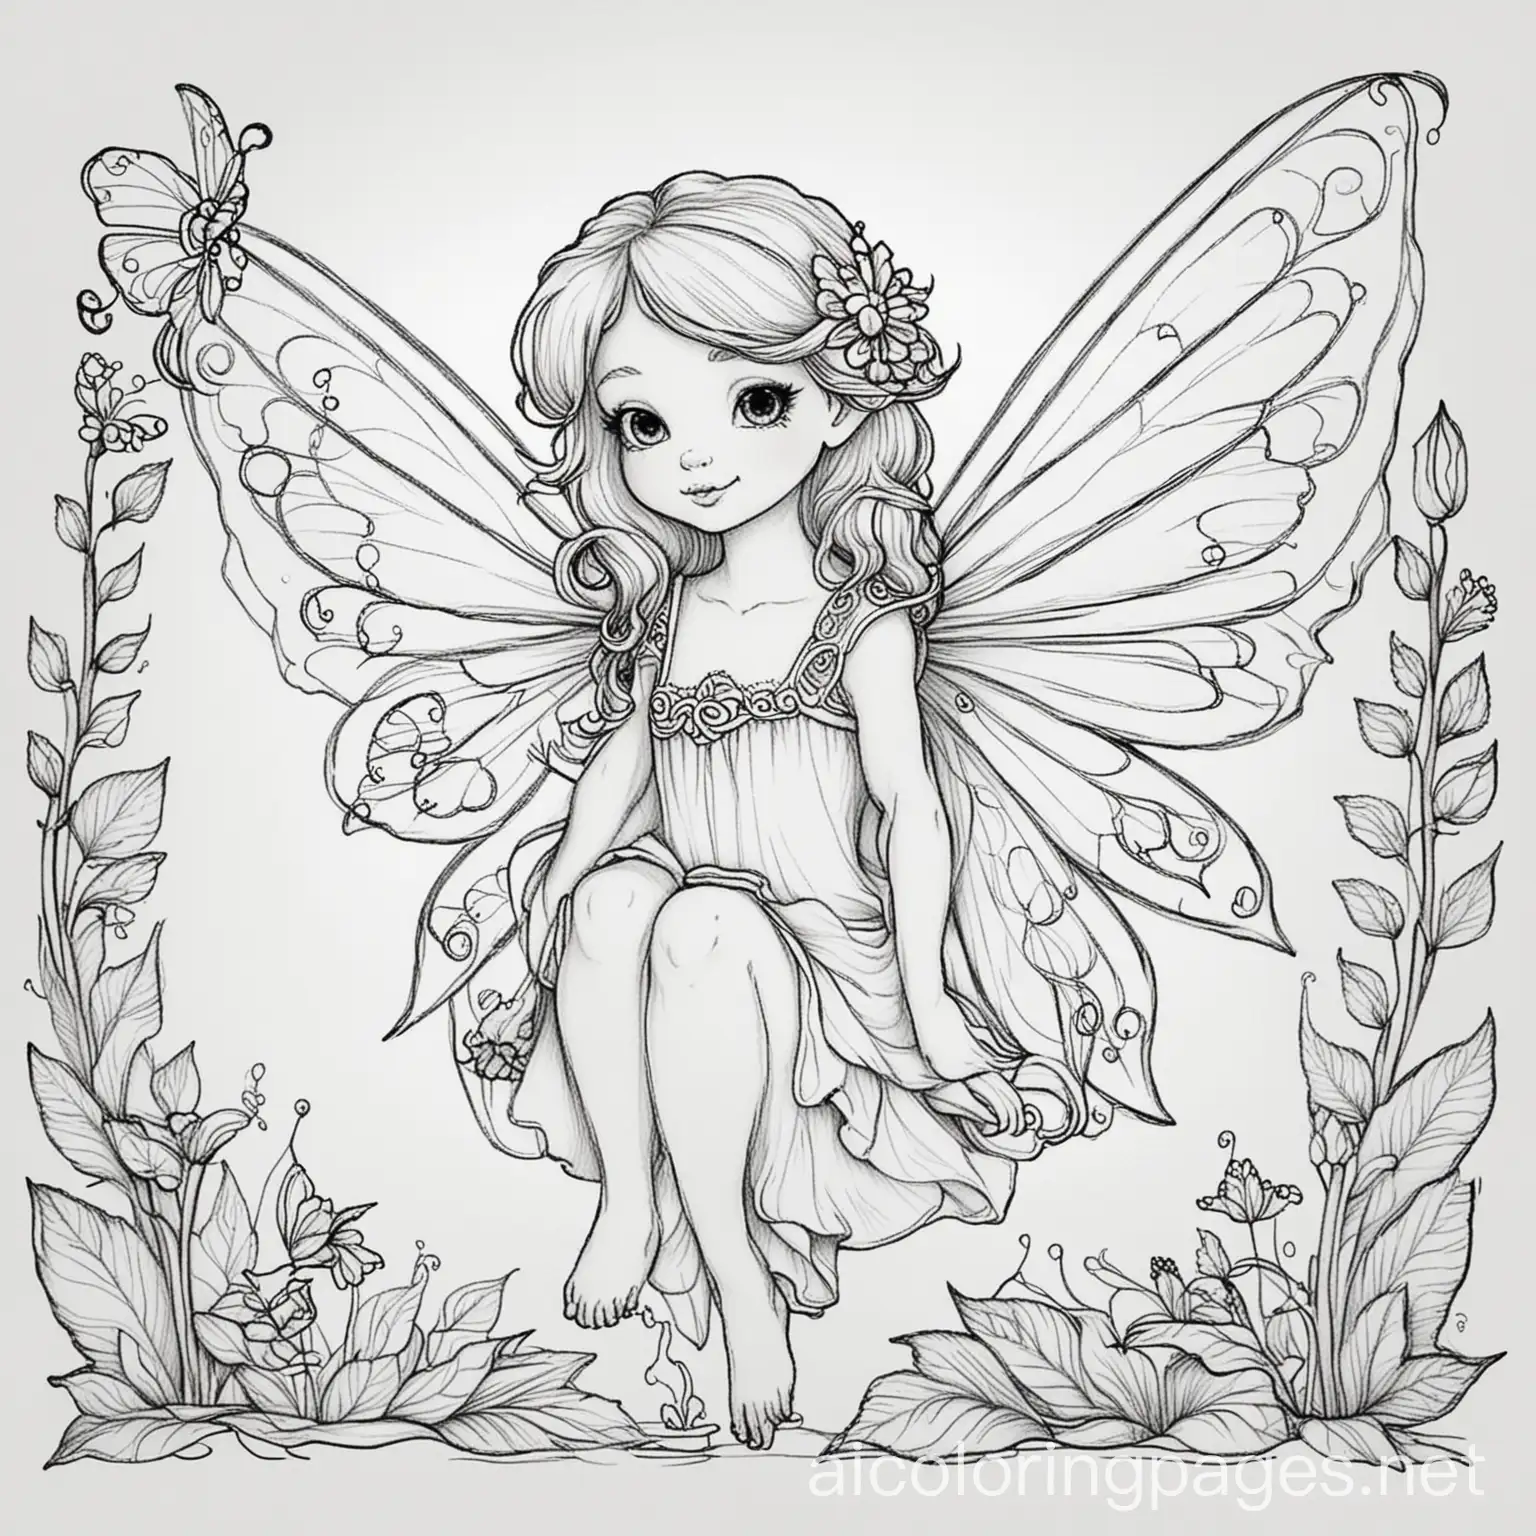 Fairy, Coloring Page, black and white, line art, white background, Simplicity, Ample White Space. The background of the coloring page is plain white to make it easy for young children to color within the lines. The outlines of all the subjects are easy to distinguish, making it simple for kids to color without too much difficulty